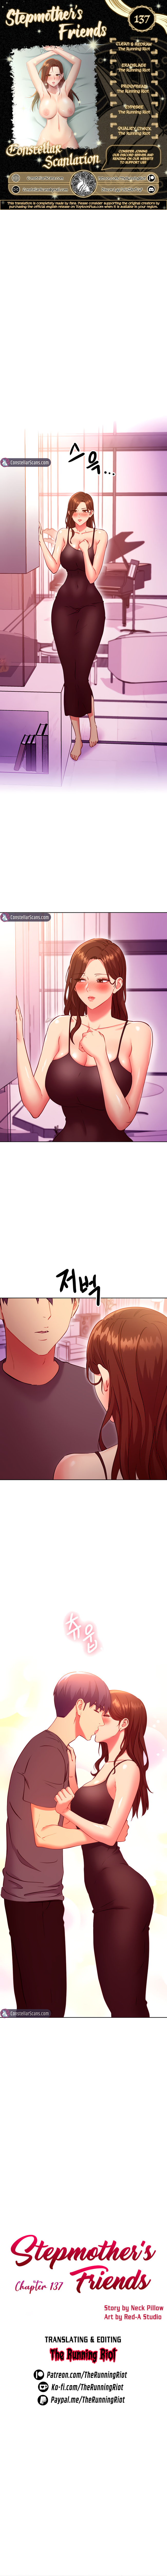 Panel Image 1 for chapter 137 of manhwa Stepmother